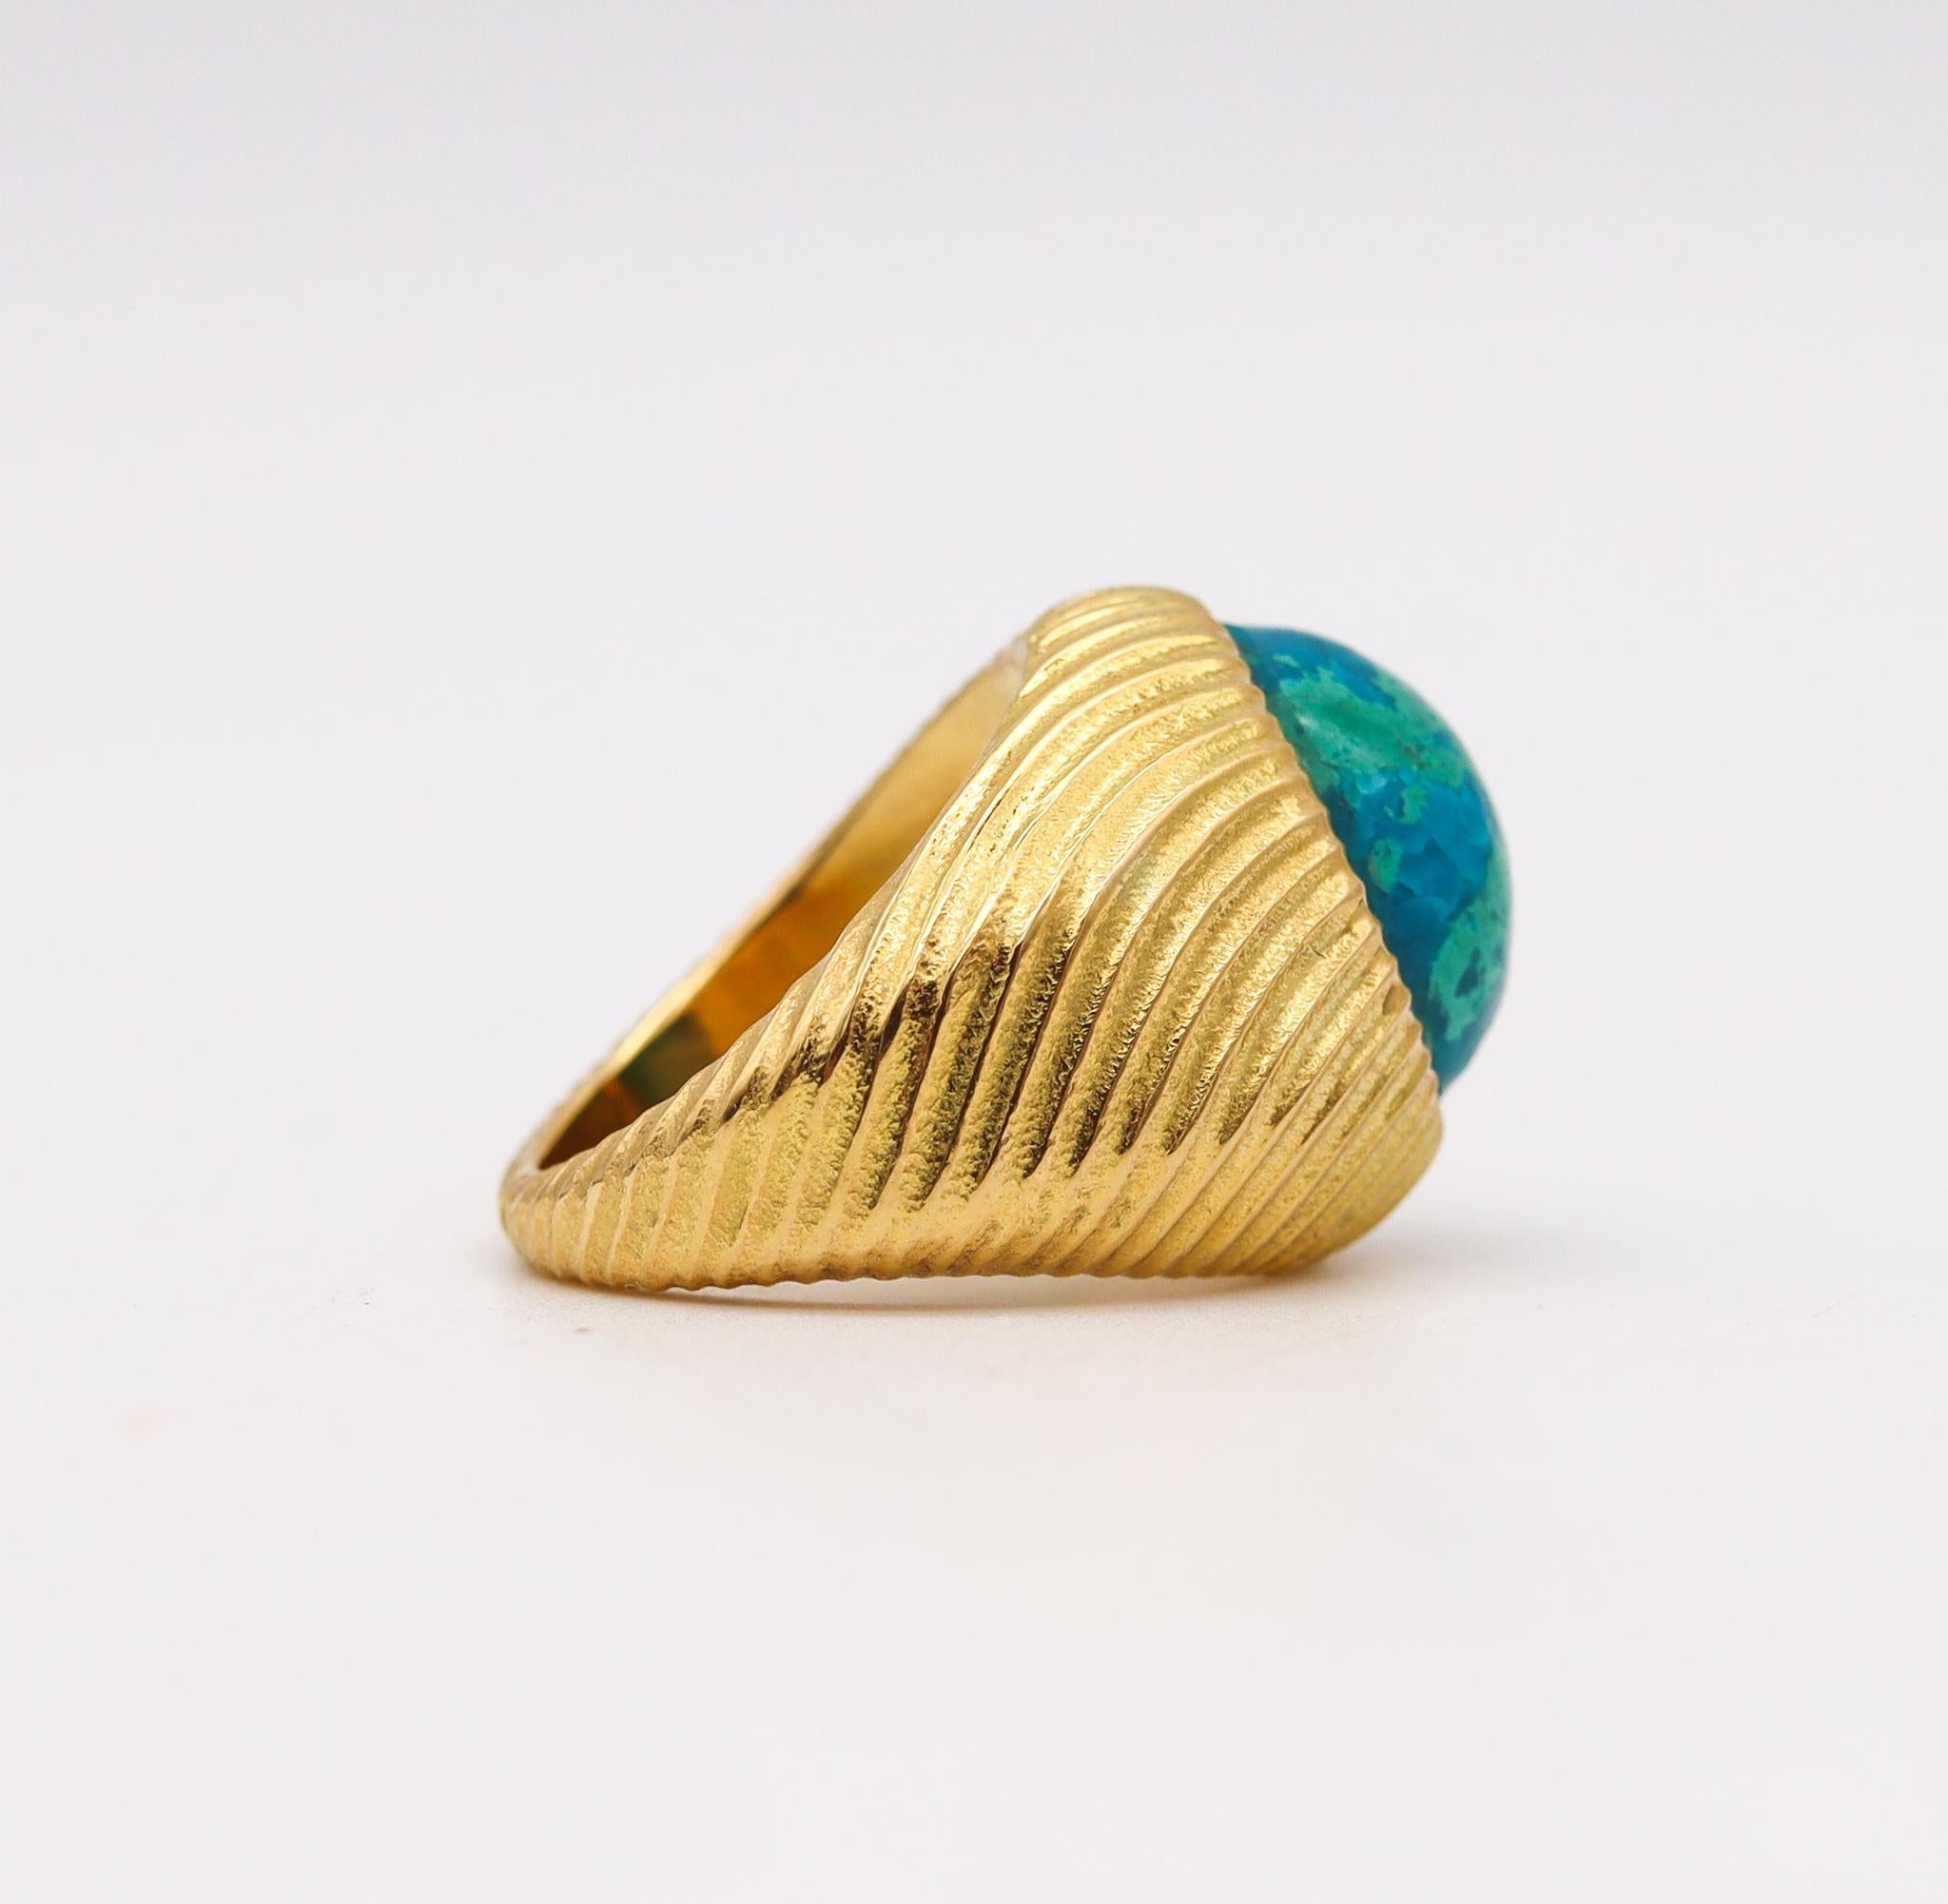 Cabochon Tiffany & Co. 1970 Schlumberger Large Cocktail Ring in 18Kt Gold & Azurmalachite